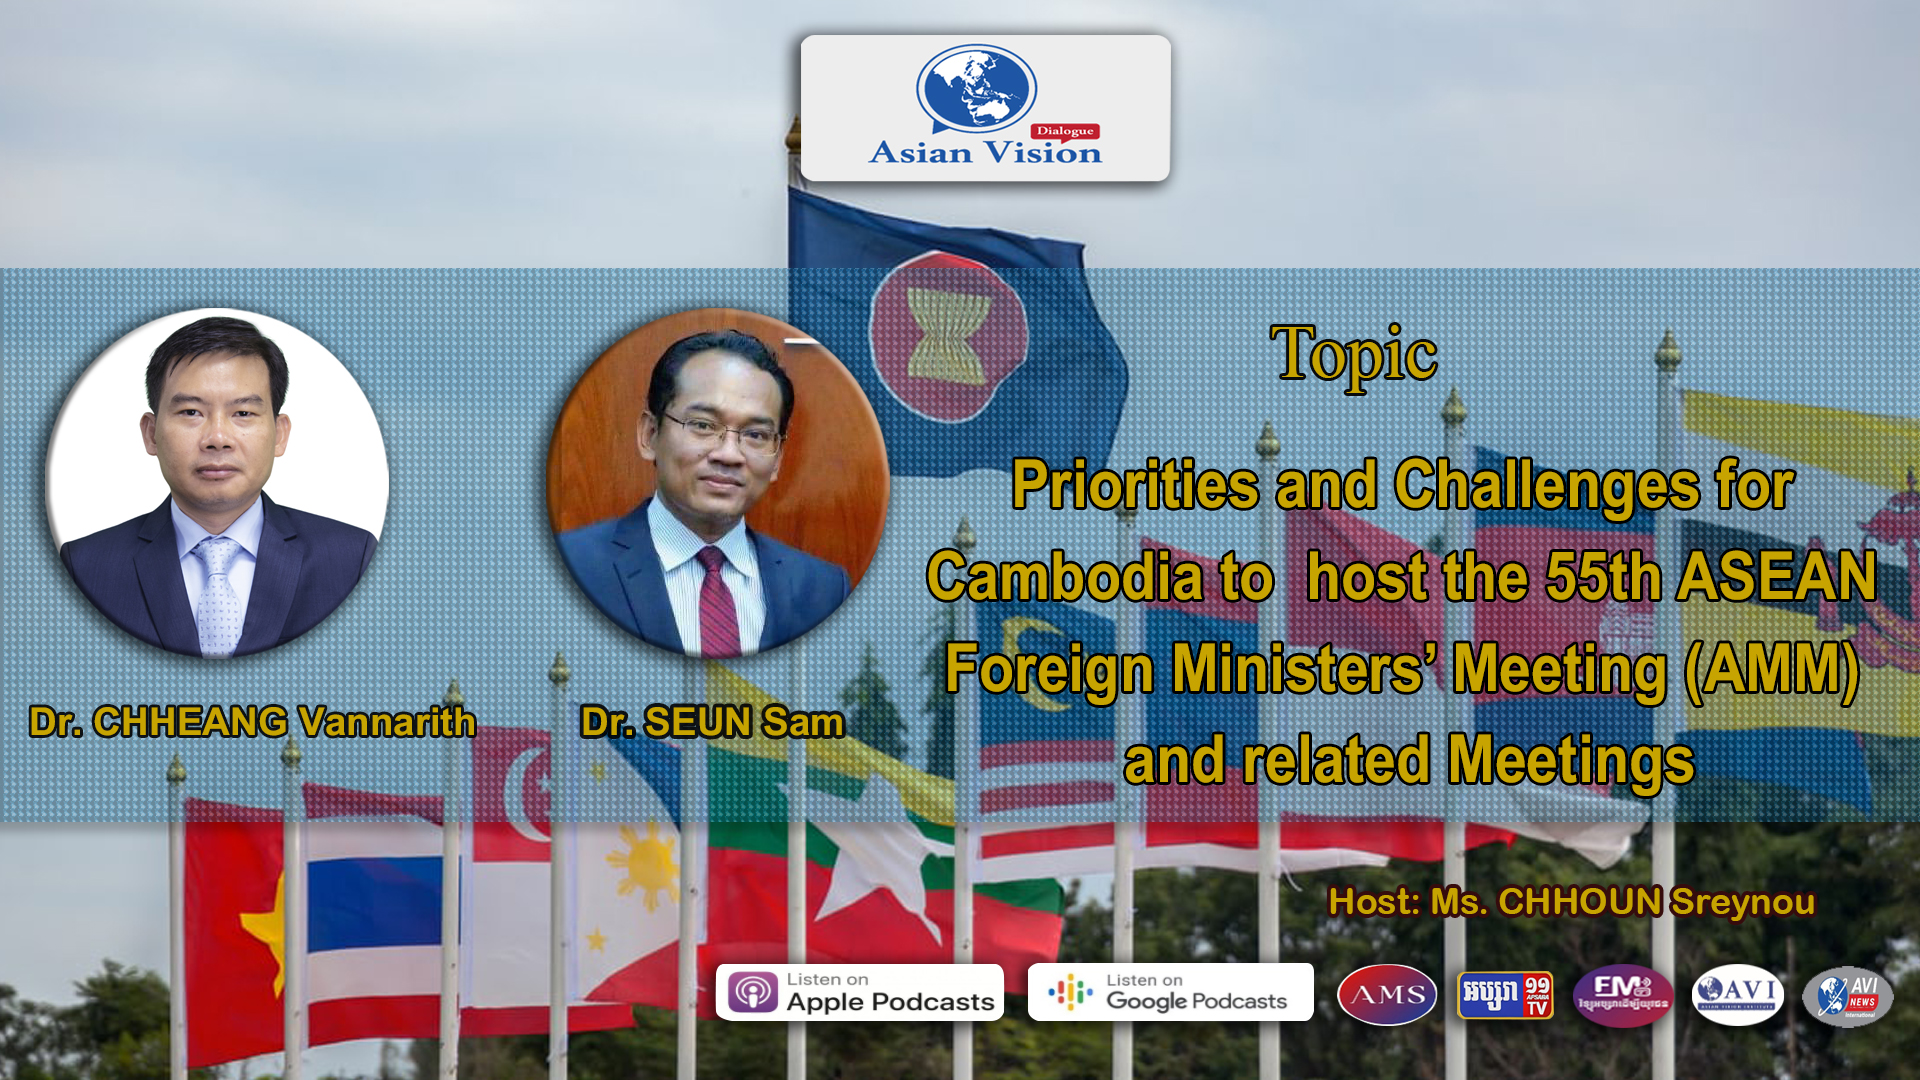 AVD Ep13: Priorities and Challenges for Cambodia to host the 55th ASEAN Foreign Ministers’ Meeting (AMM) and related Meetings